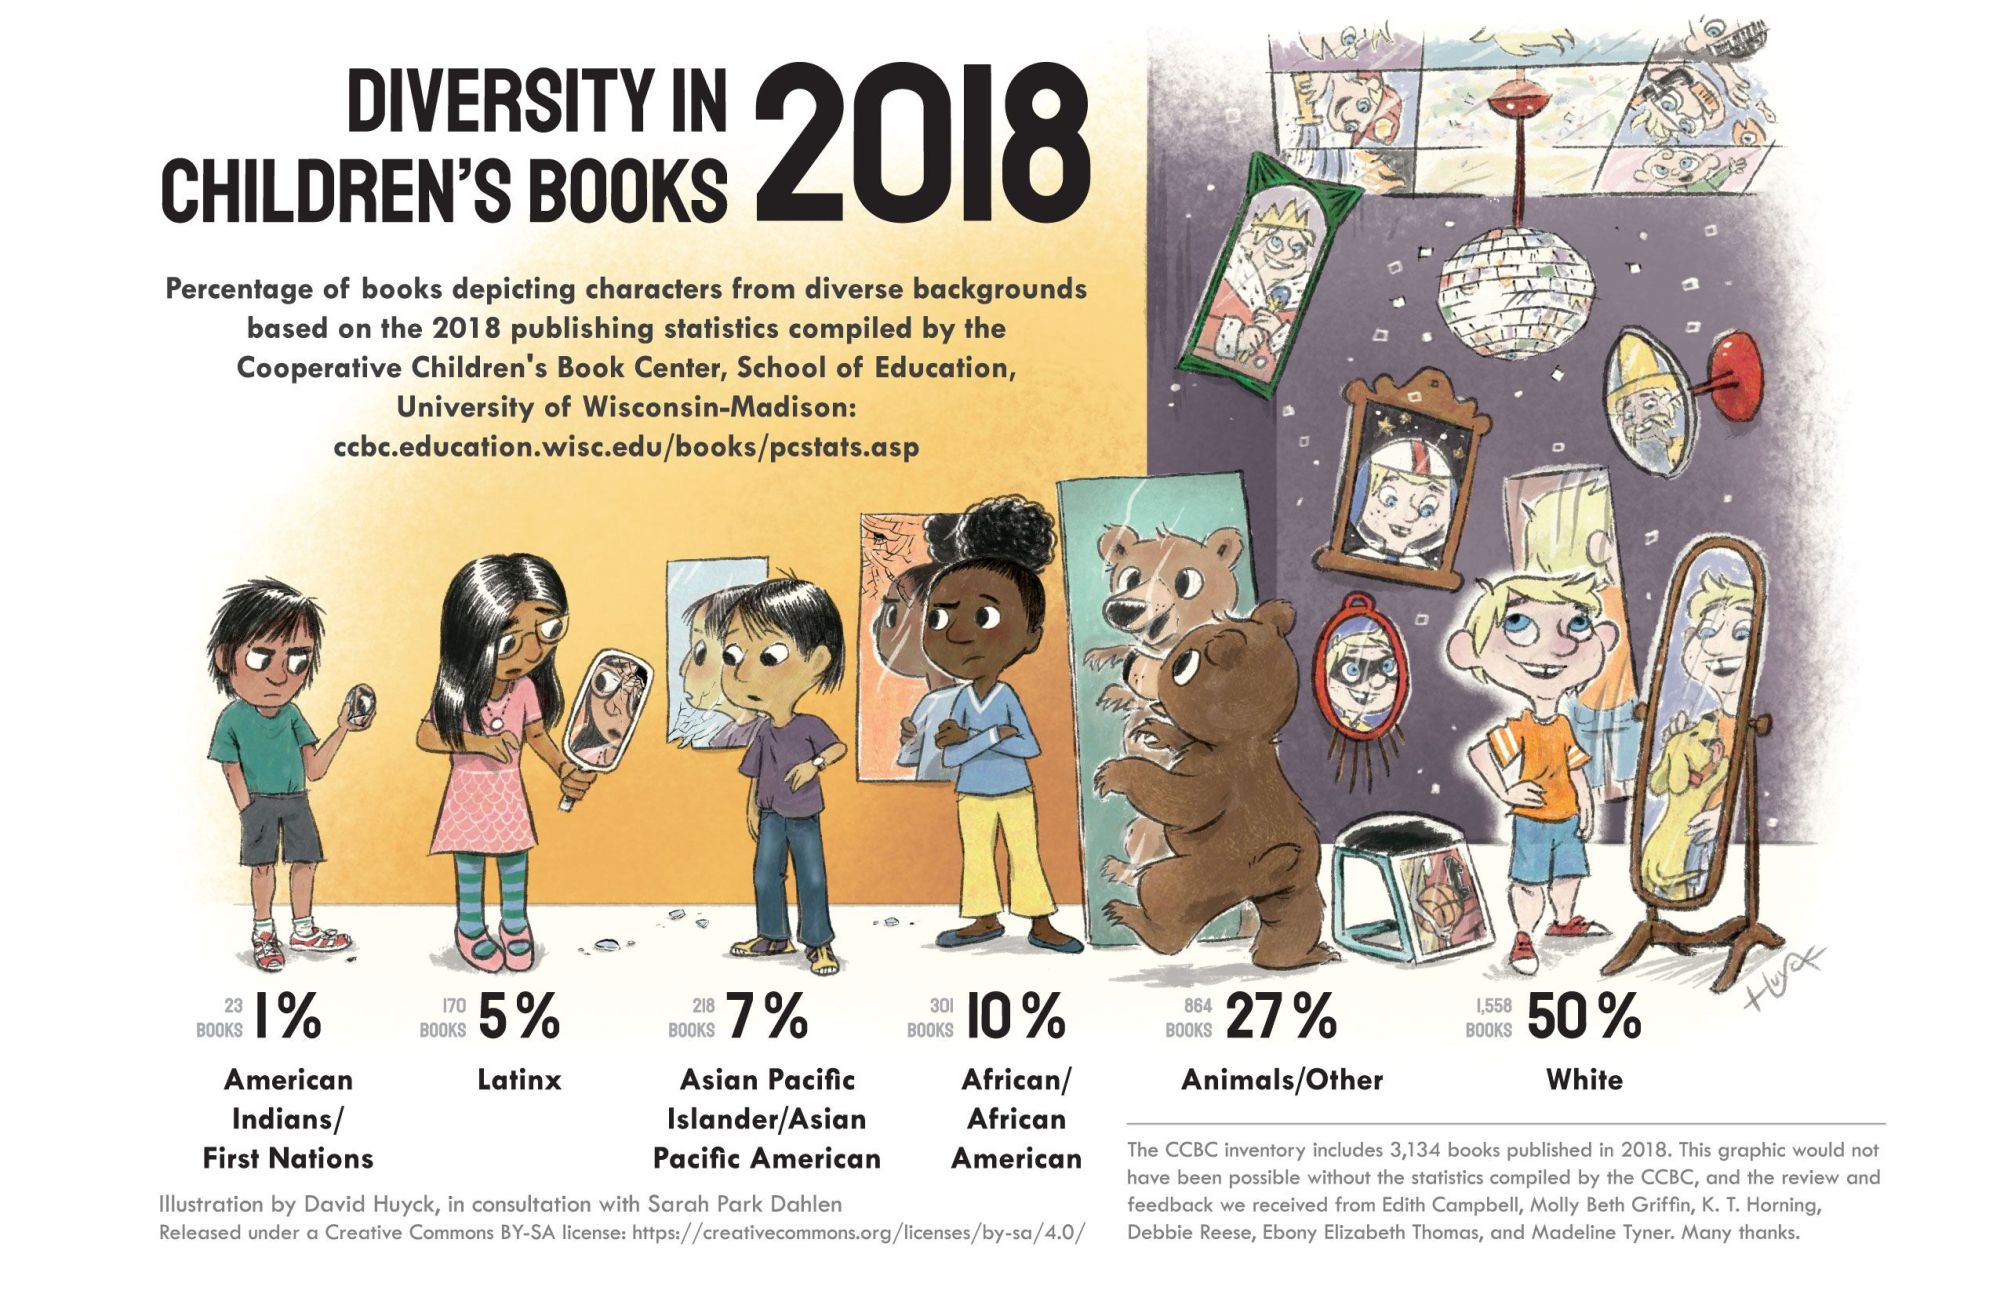 Diversity in children's books in 2018 was 50% White, 27% animals/other, 10% African American, 7% AAPI, 5% Latinx, and 1% American Indian.